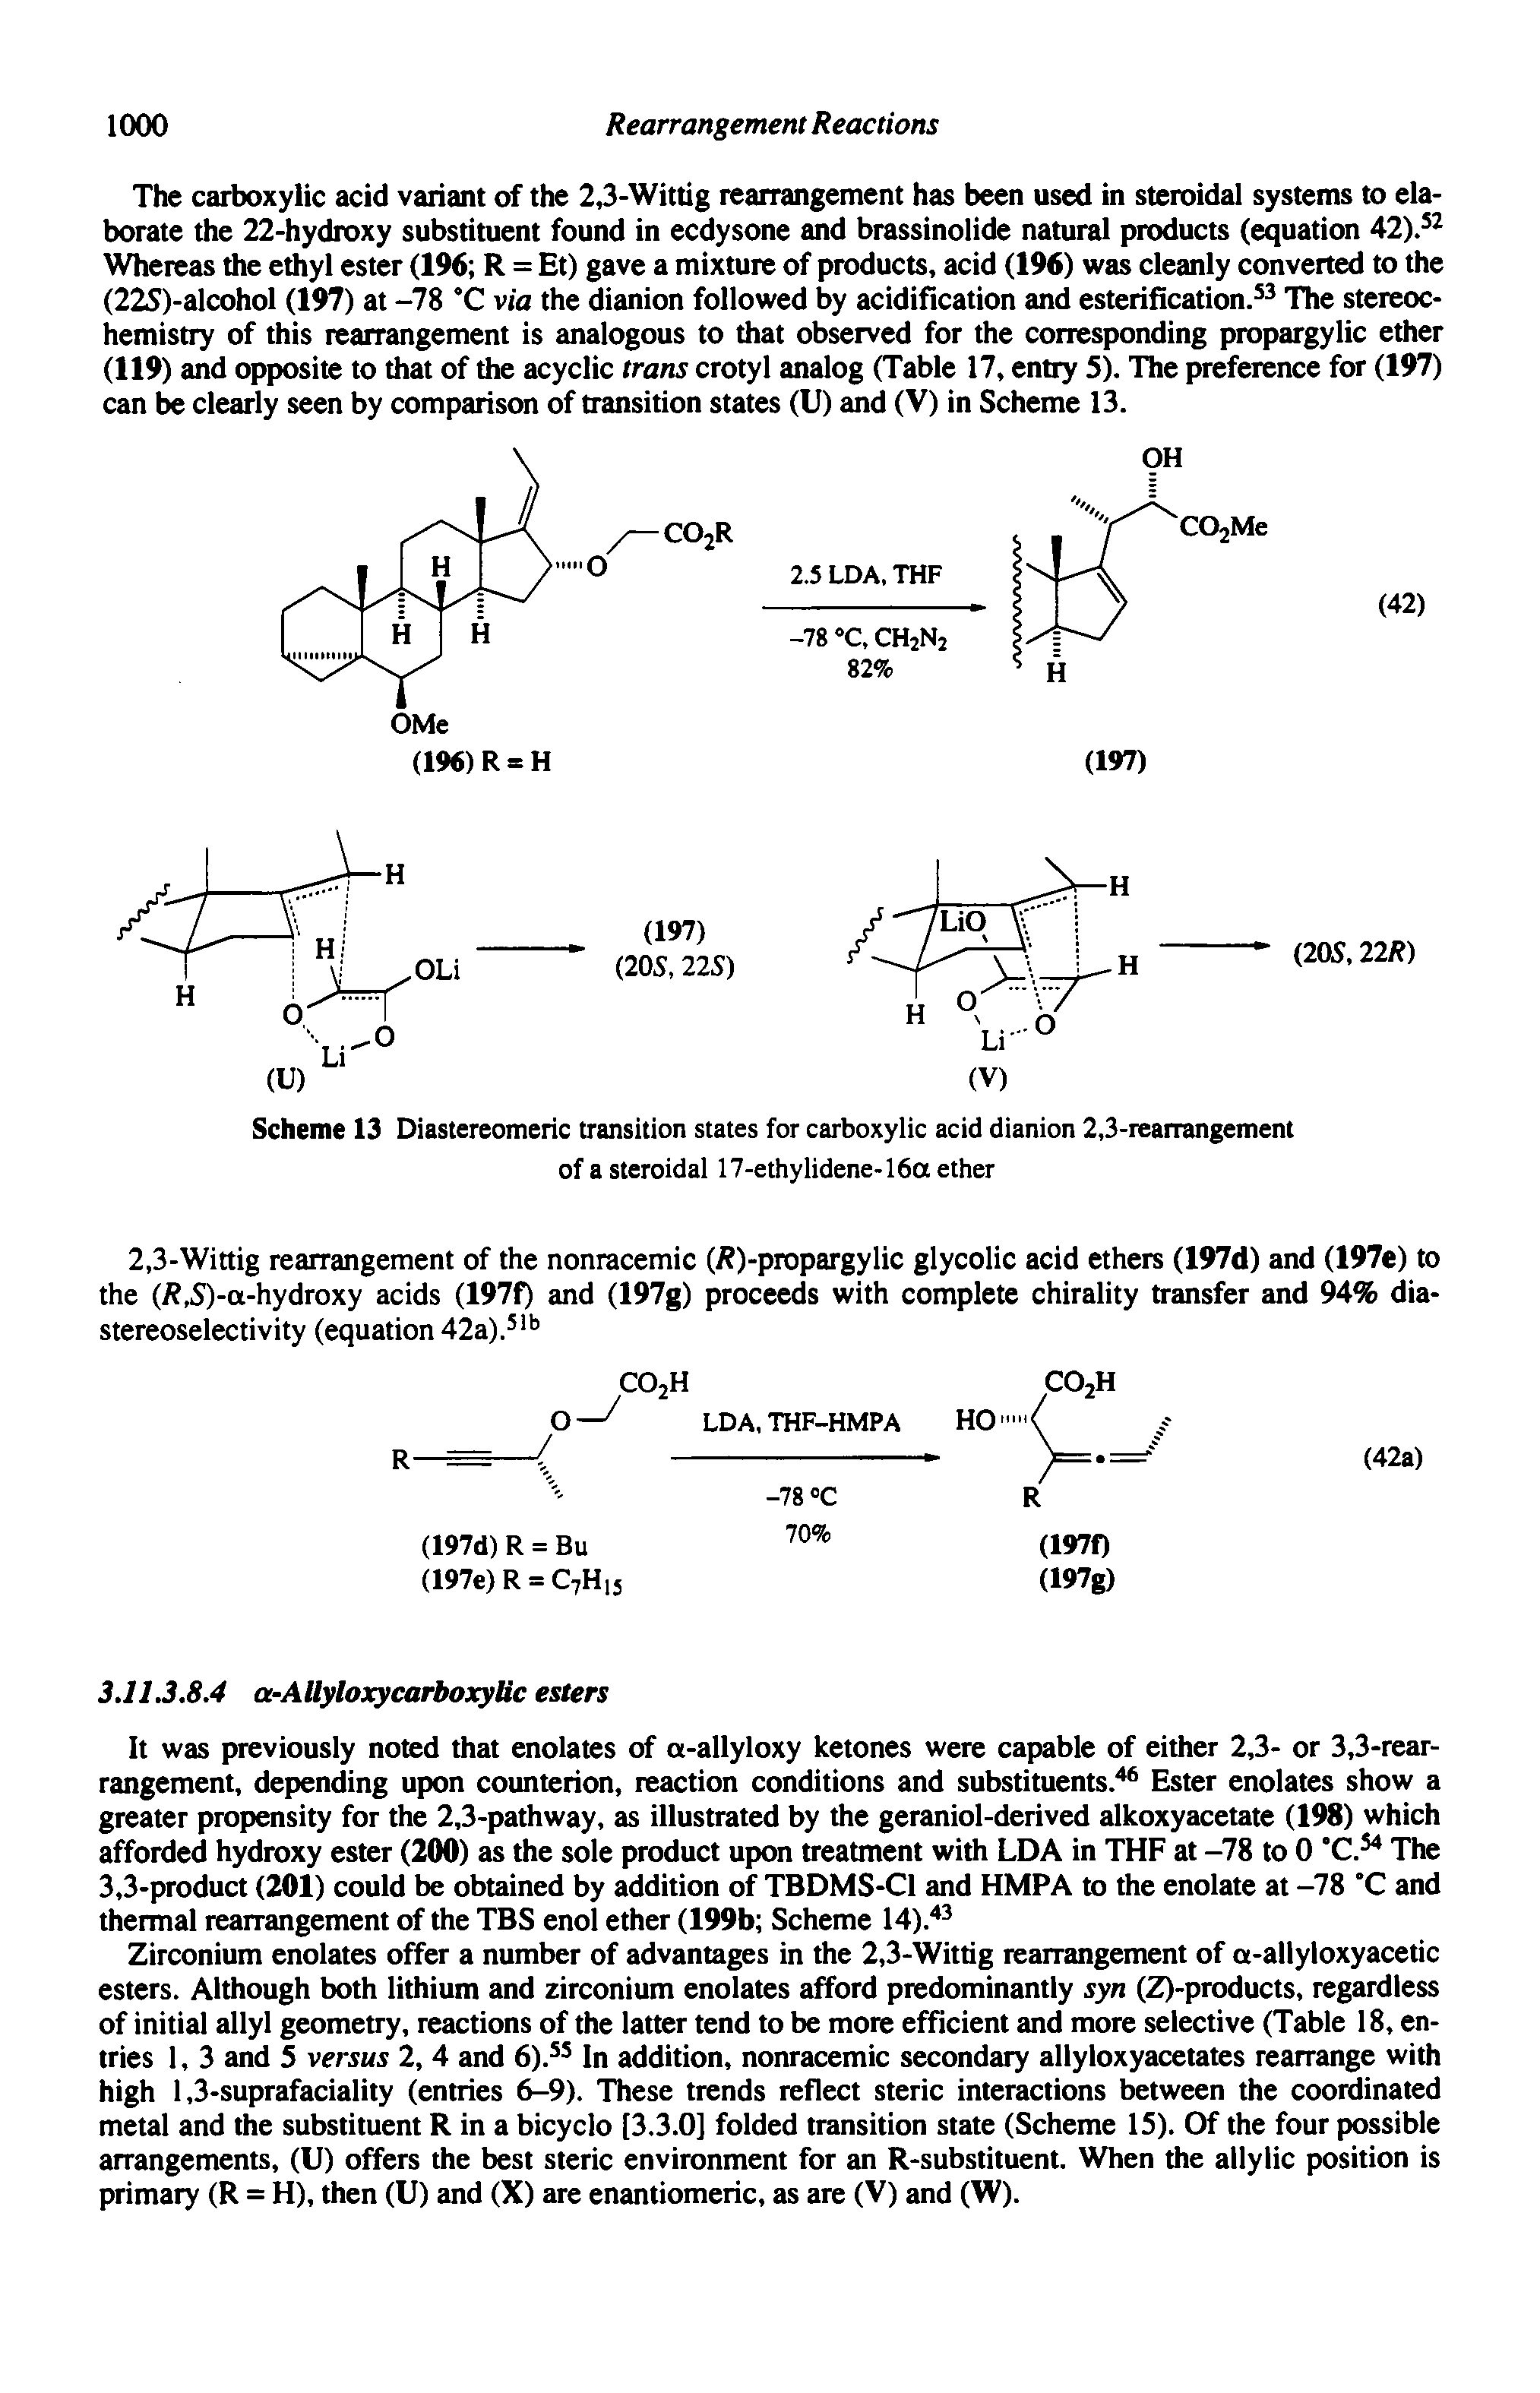 Scheme 13 Diastereomeric transition states for carboxylic acid dianion 2,3-rearrangement of a steroidal 17-ethylidene-16a ether...